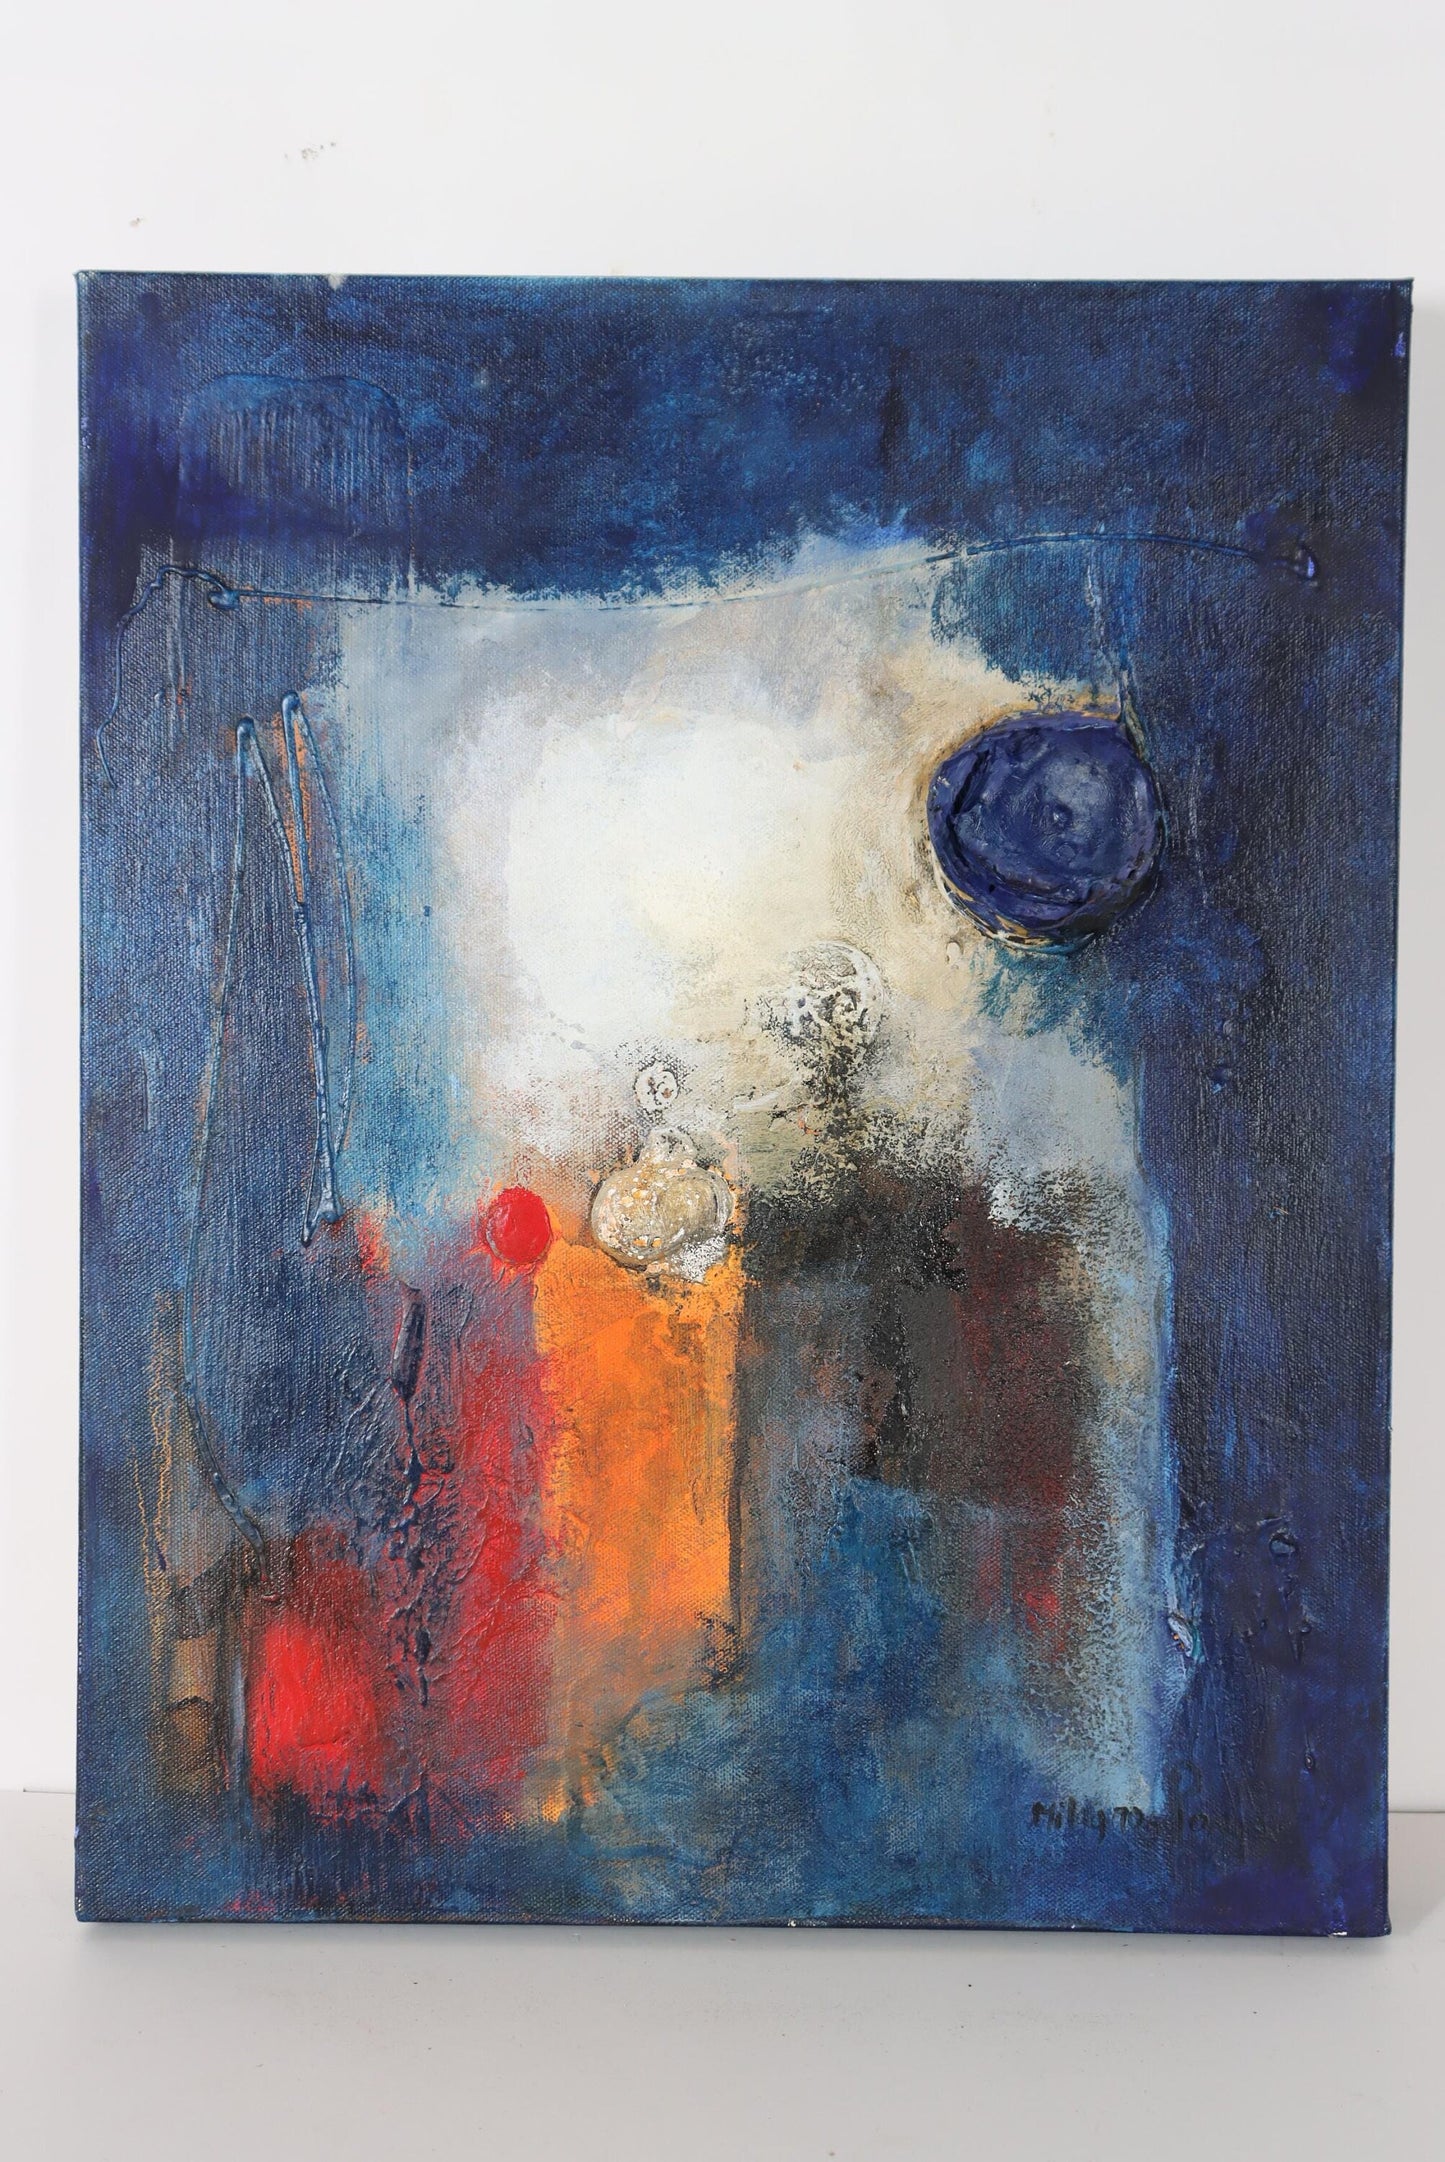 Milagros Pongo (Peruvian 1972-) Abstract Surrealism Original Oil - 20"H x 16"W-  Well Exhibited and thought after artist galley prices!